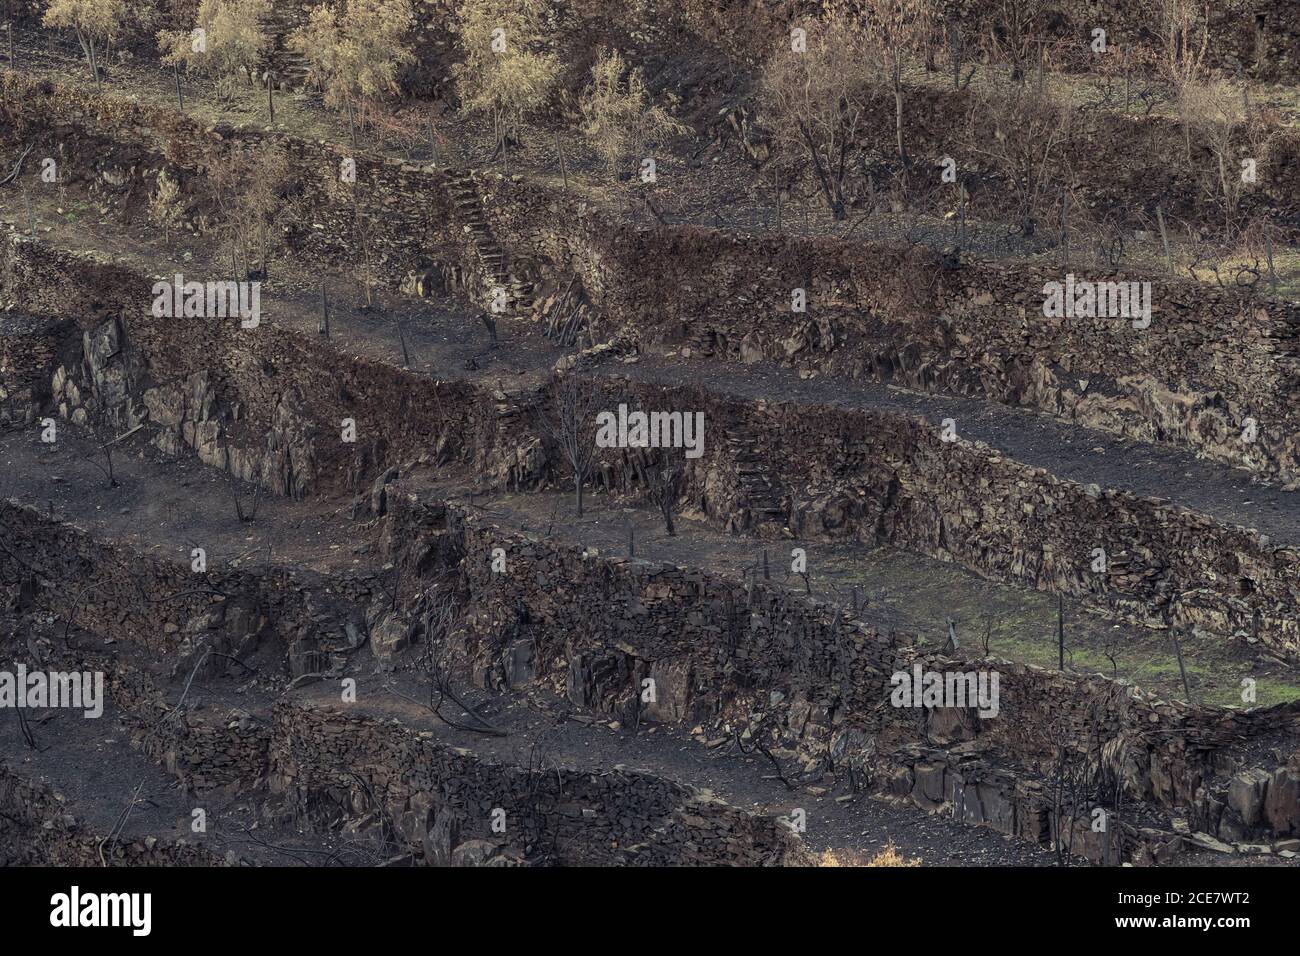 Drone view of lifeless trees and dried grass in forest after destructive fire Stock Photo